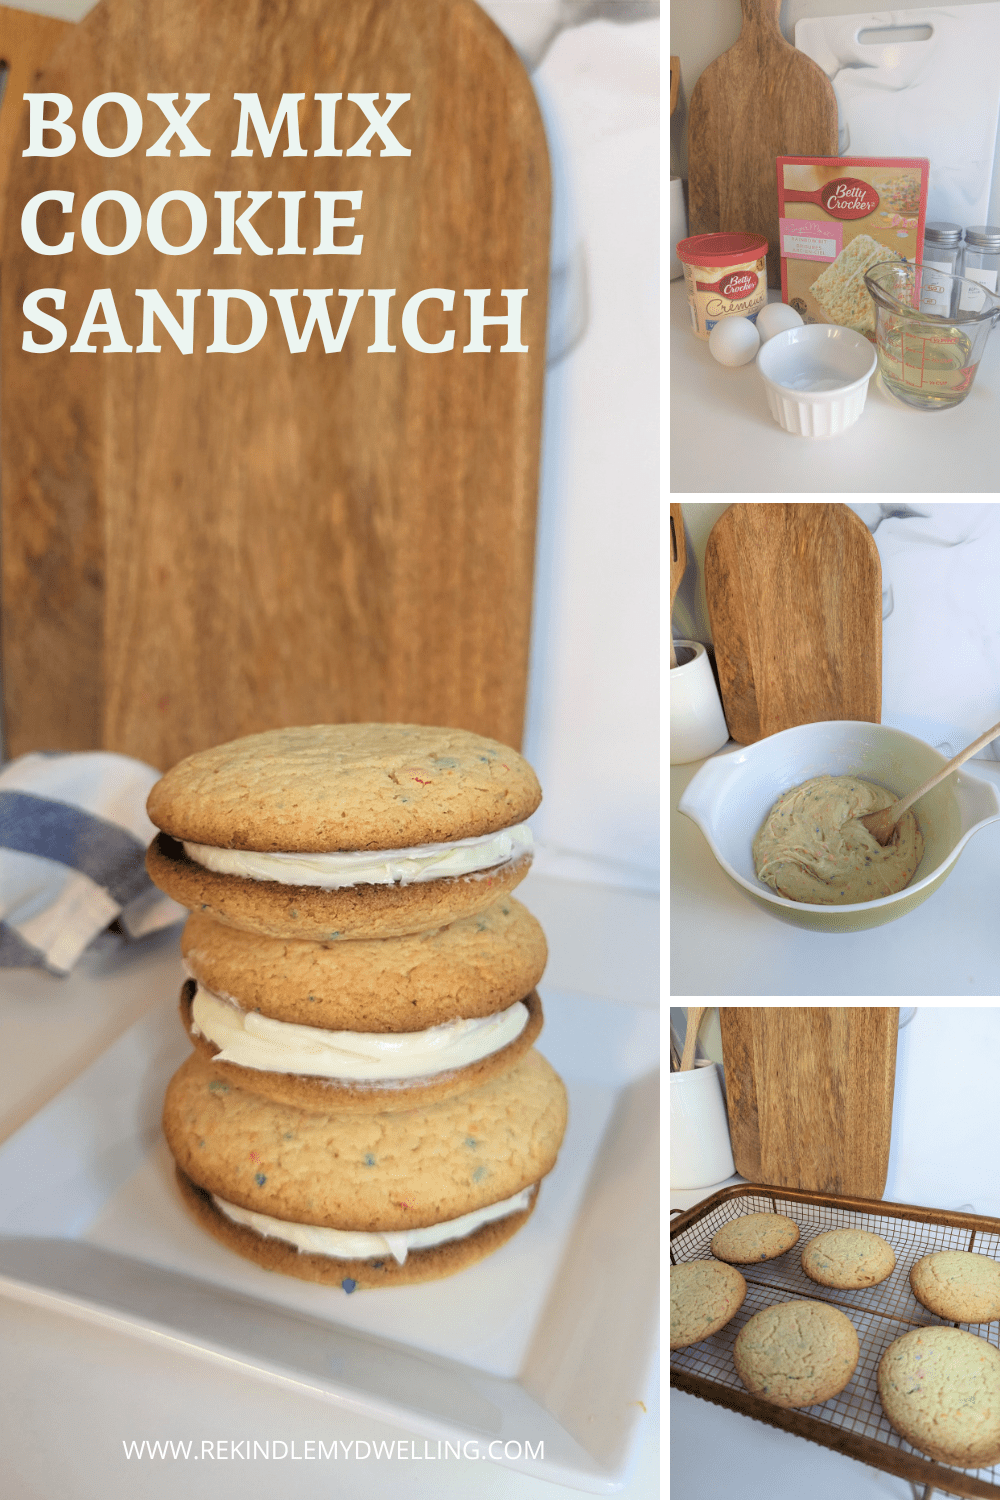 Collage showing how to make a cake mix cookie sandwich with text overlay.